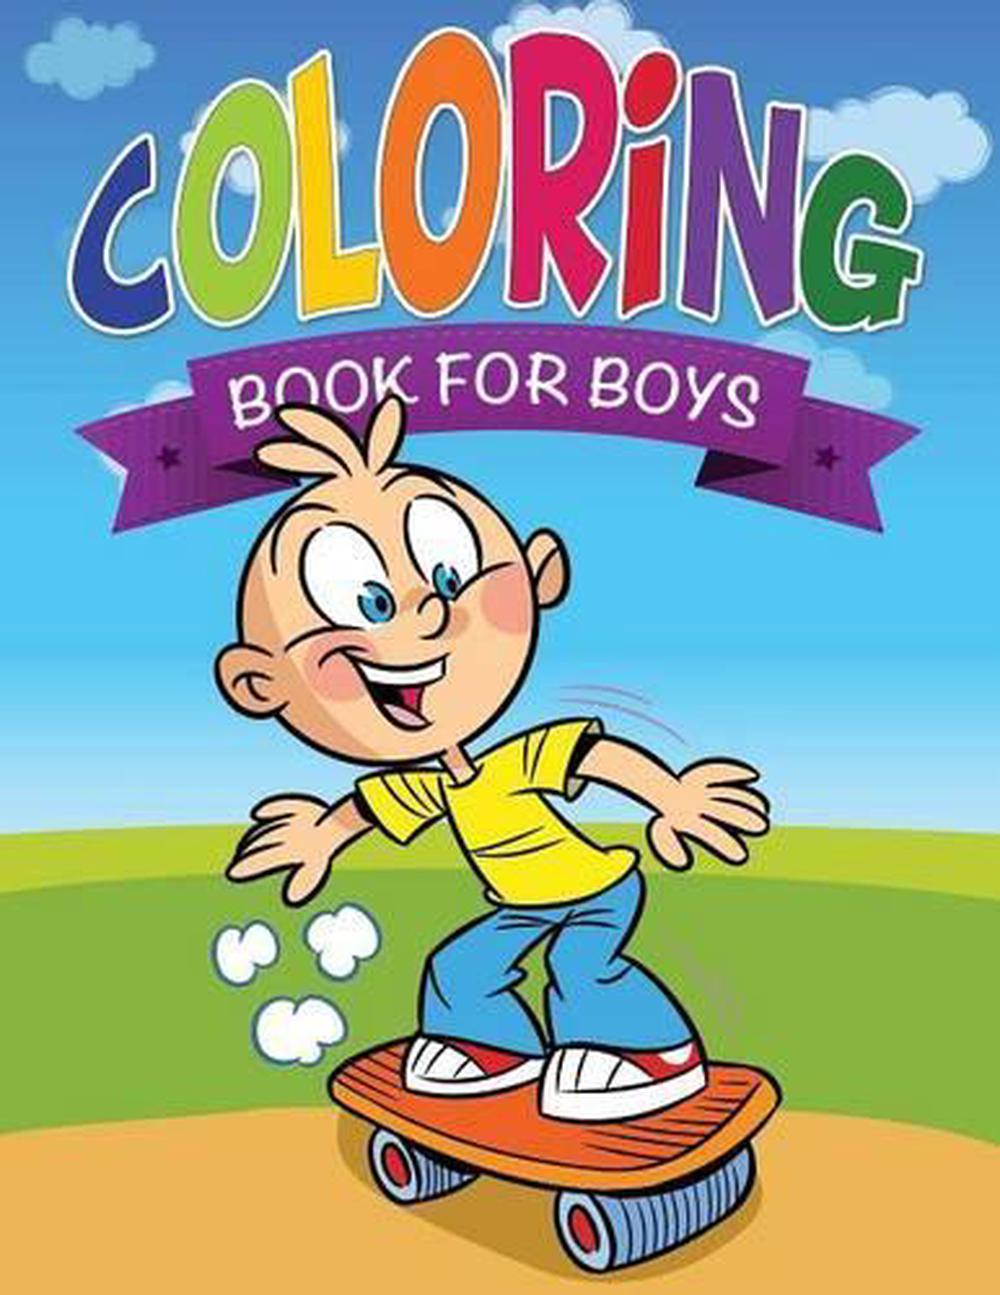 Coloring Book for Boys by Speedy Publishing LLC (English) Paperback